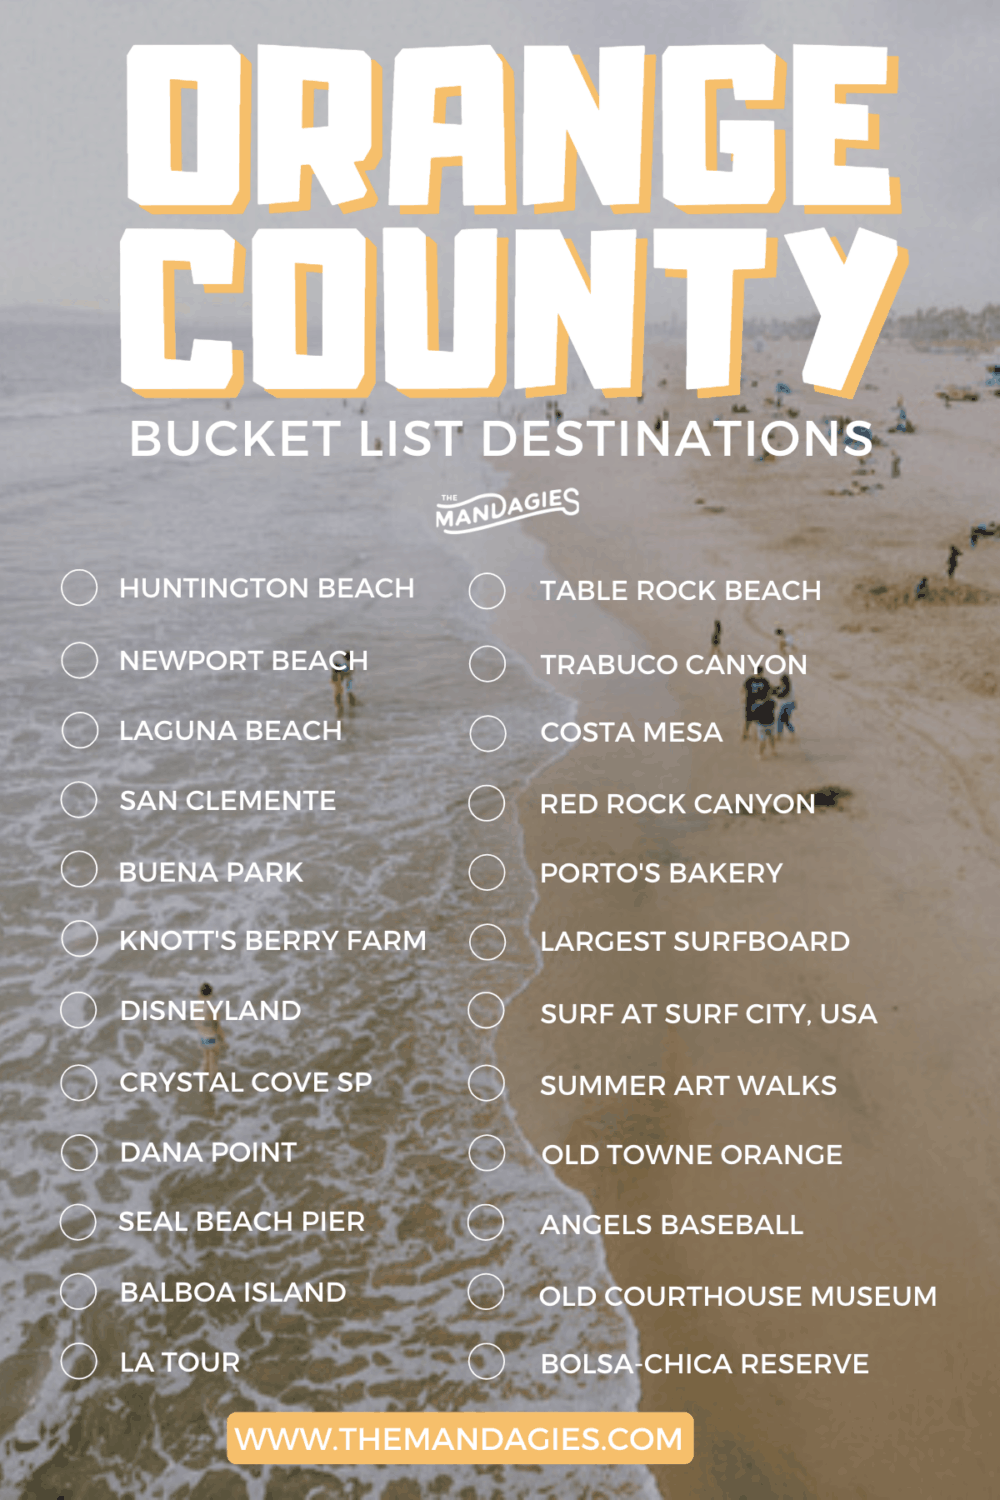 Looking for awesome things to do in Orange County? We're sharing incredible outdoor activities, hikes, beaches, and more here! Save for inspiration on places to go in Orange County for a weekend trip or your OC Bucket List! #california #orangecounty #disneyland #huntingtonbeach #surfing #sunrise #travel #westernUSA #buckelist #travelinspiration #surfcityusa #lagunabeach #USA #TheOC